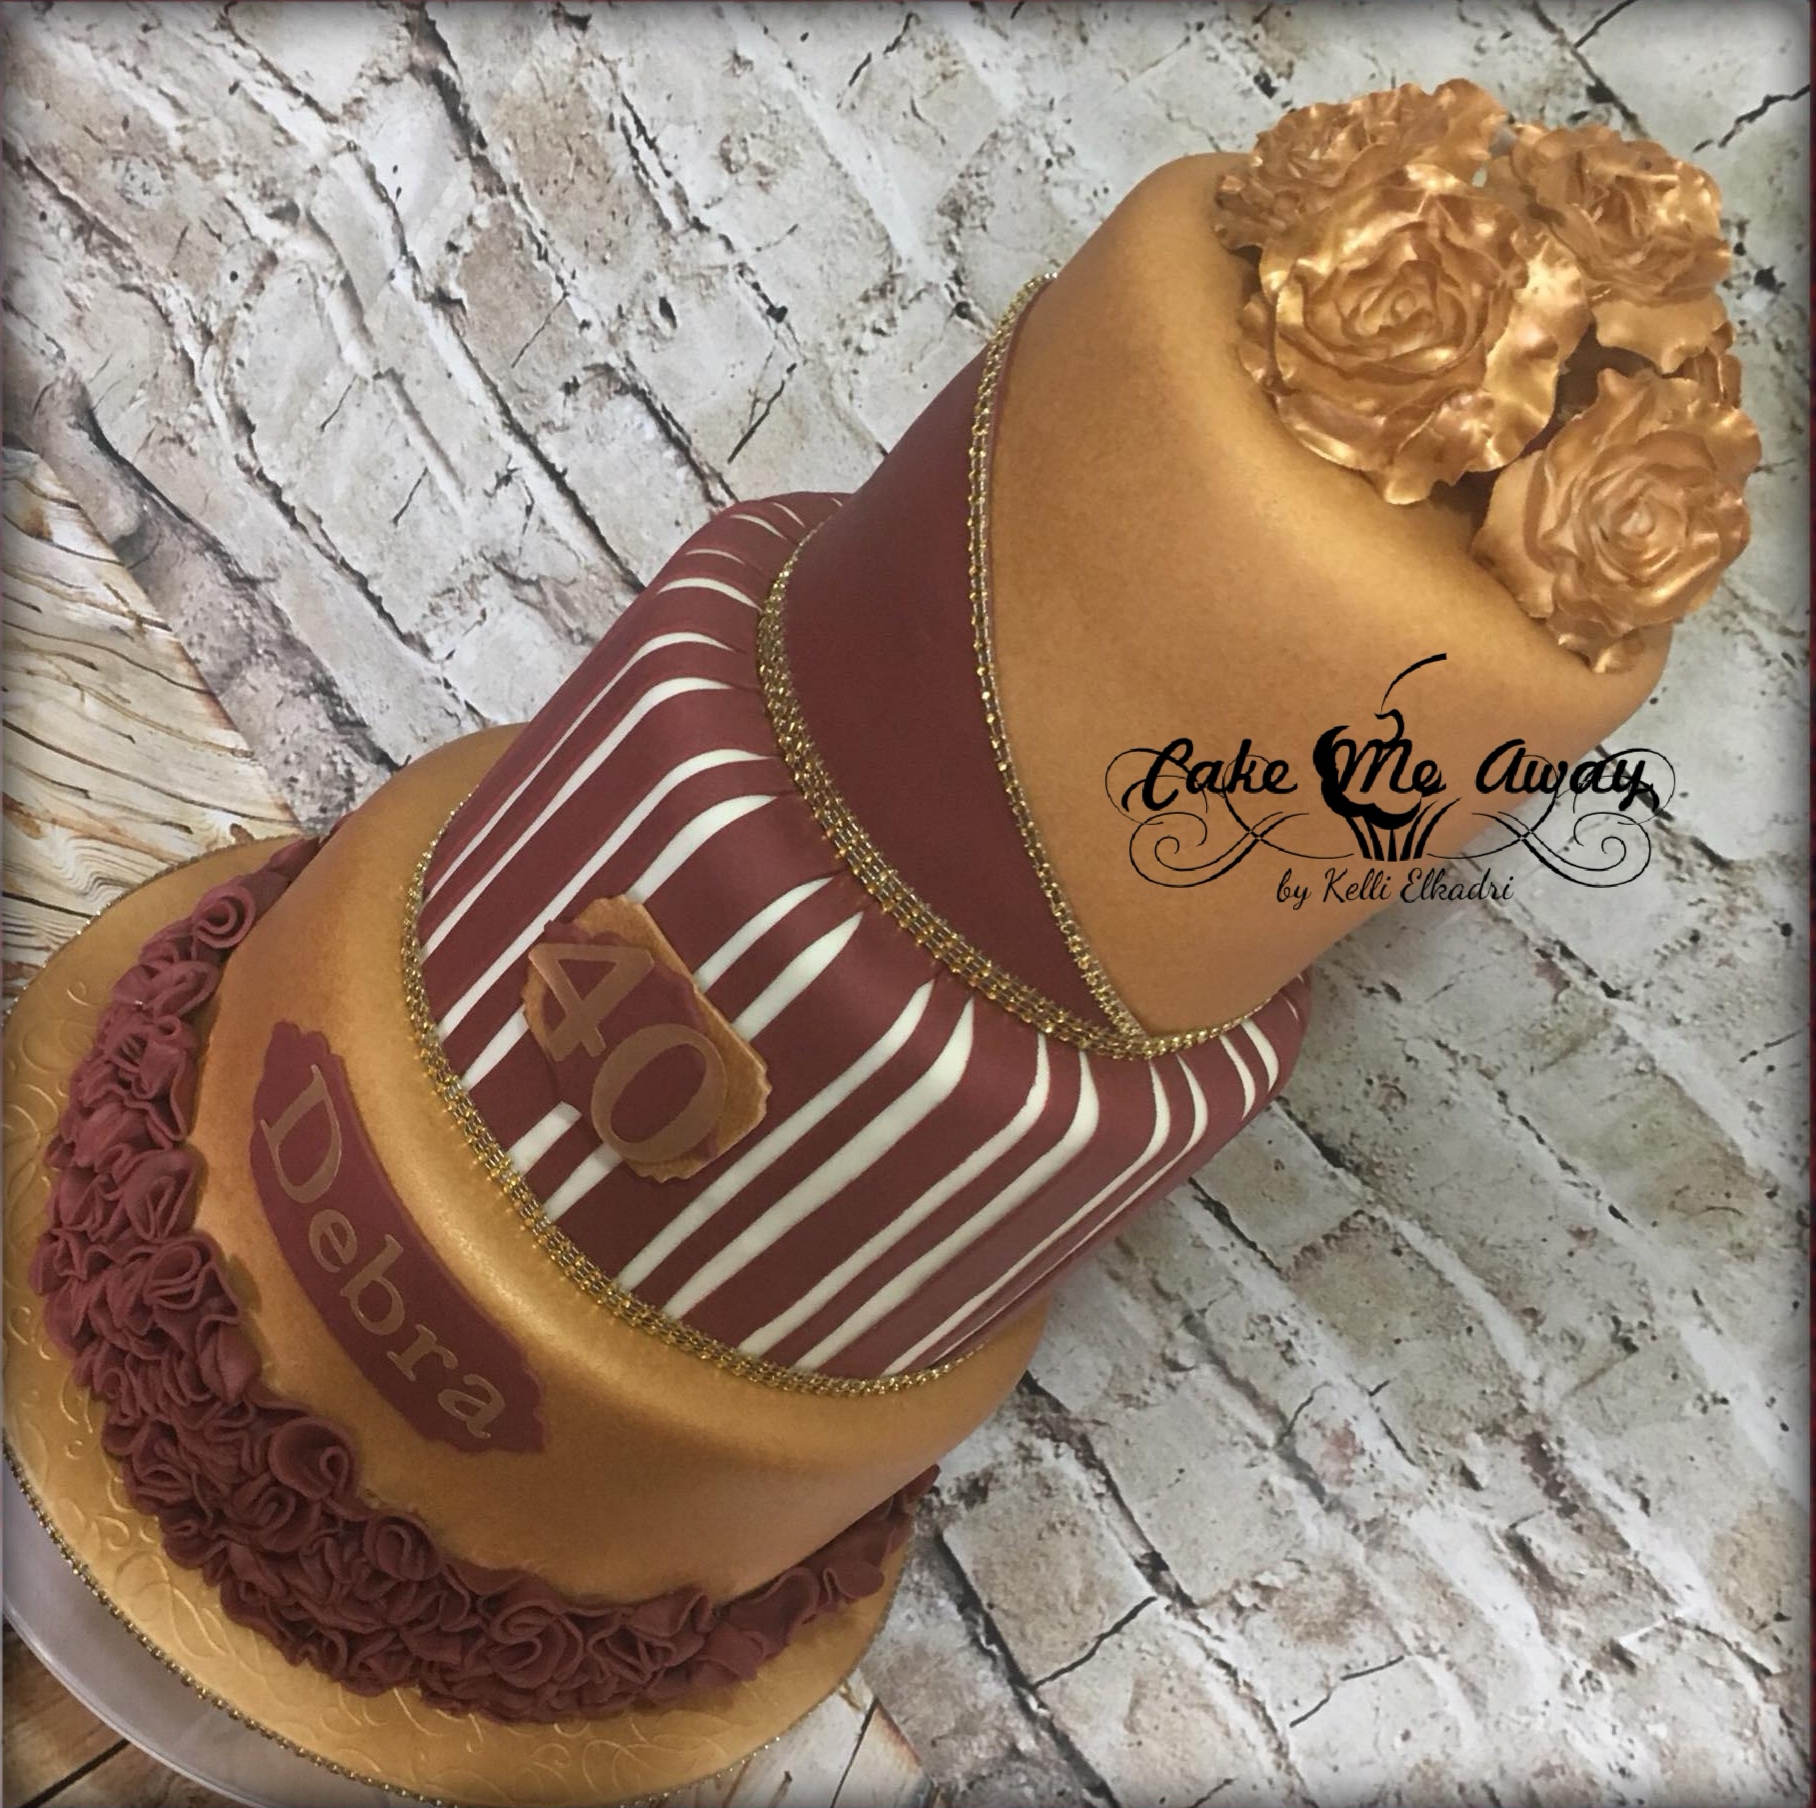 Game over Bachelorette cake | Buy cakes for bride to be - Kukkr Cakes